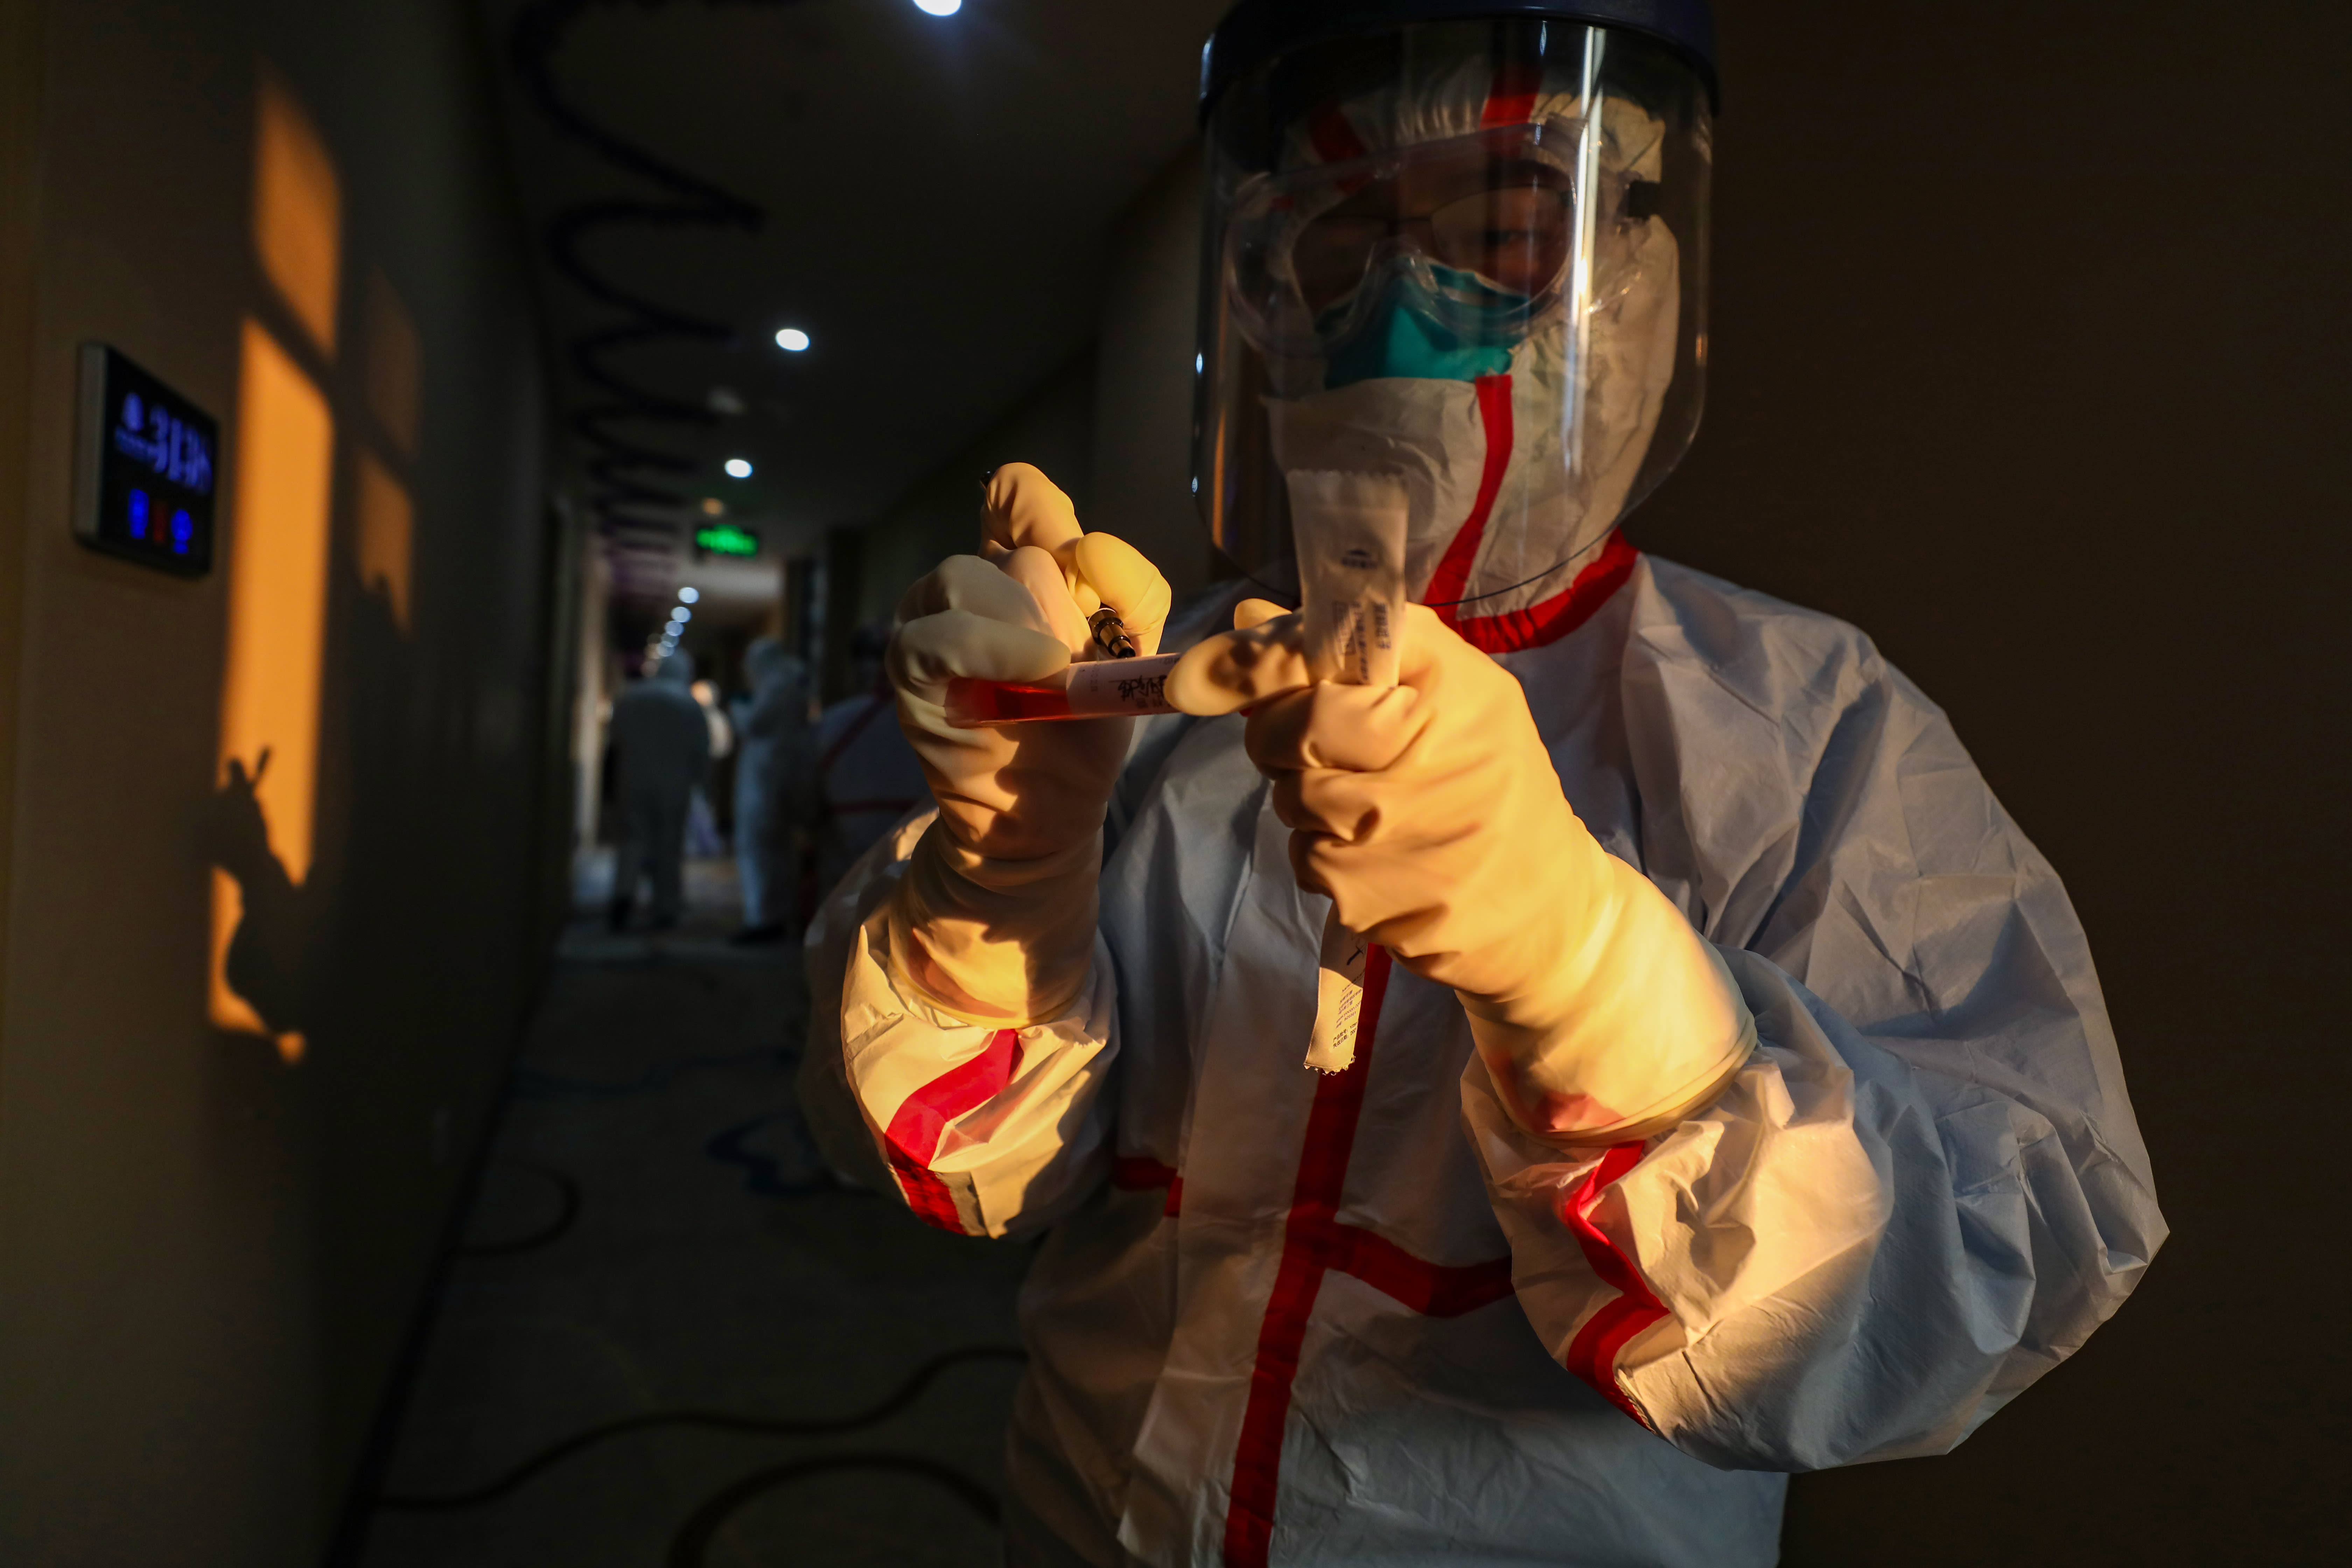 Virus disclosure in China was delayed because disease control group lacks authority, top scientist says